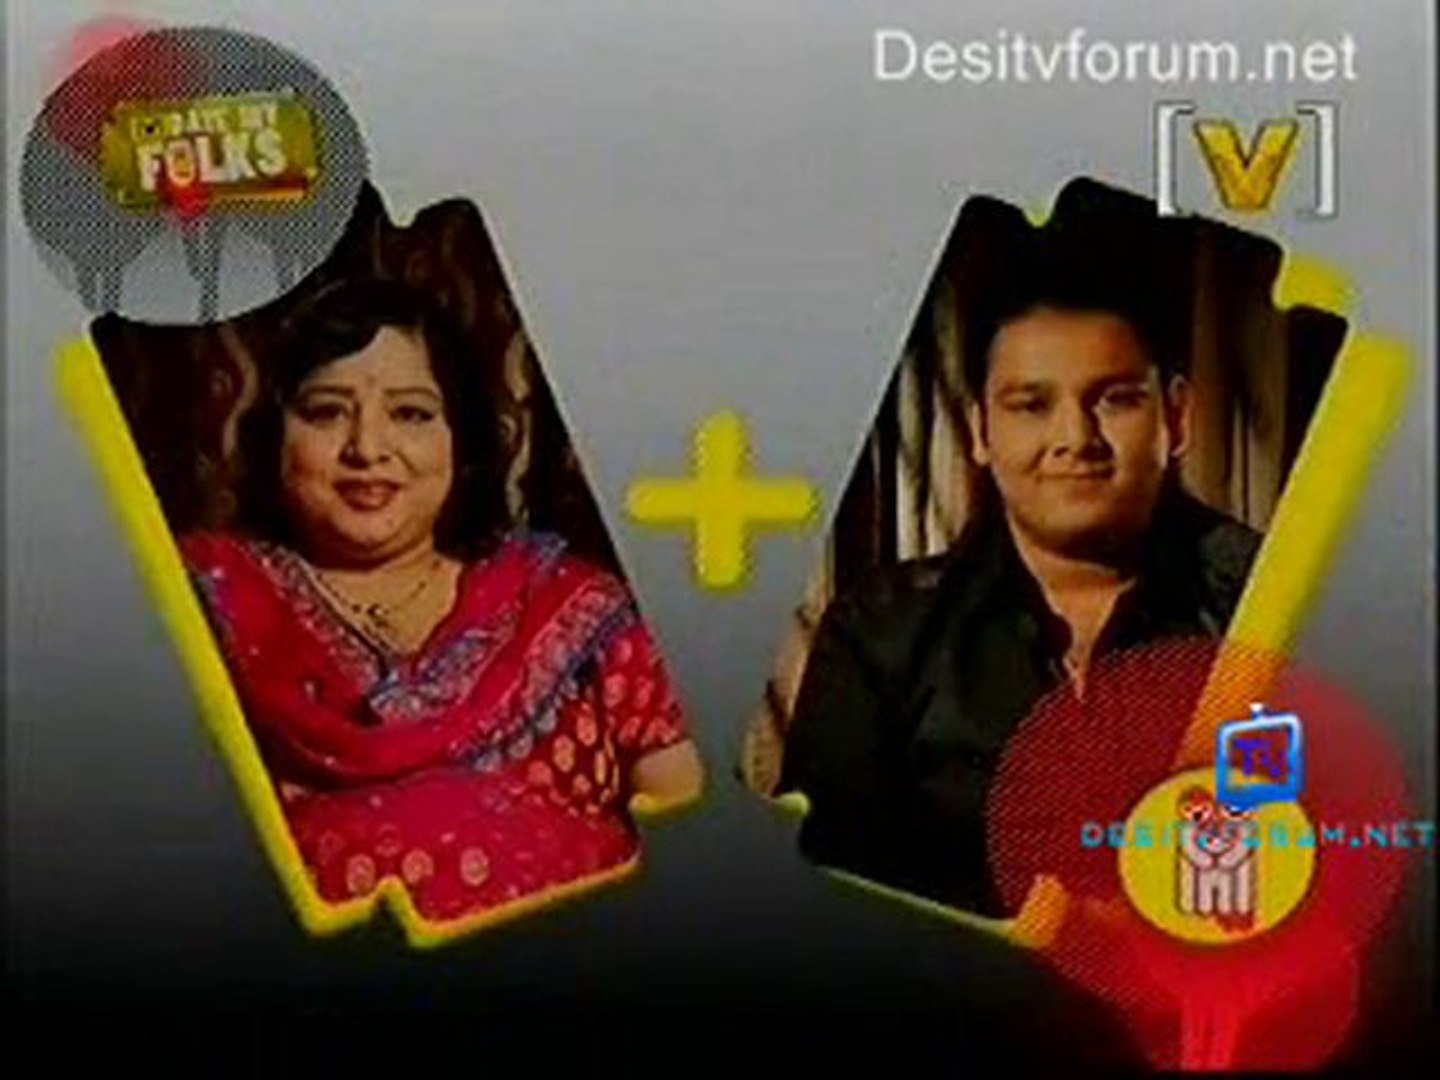 [V] Date My Folks - [Episode 1] - 7th January 2011 Part1